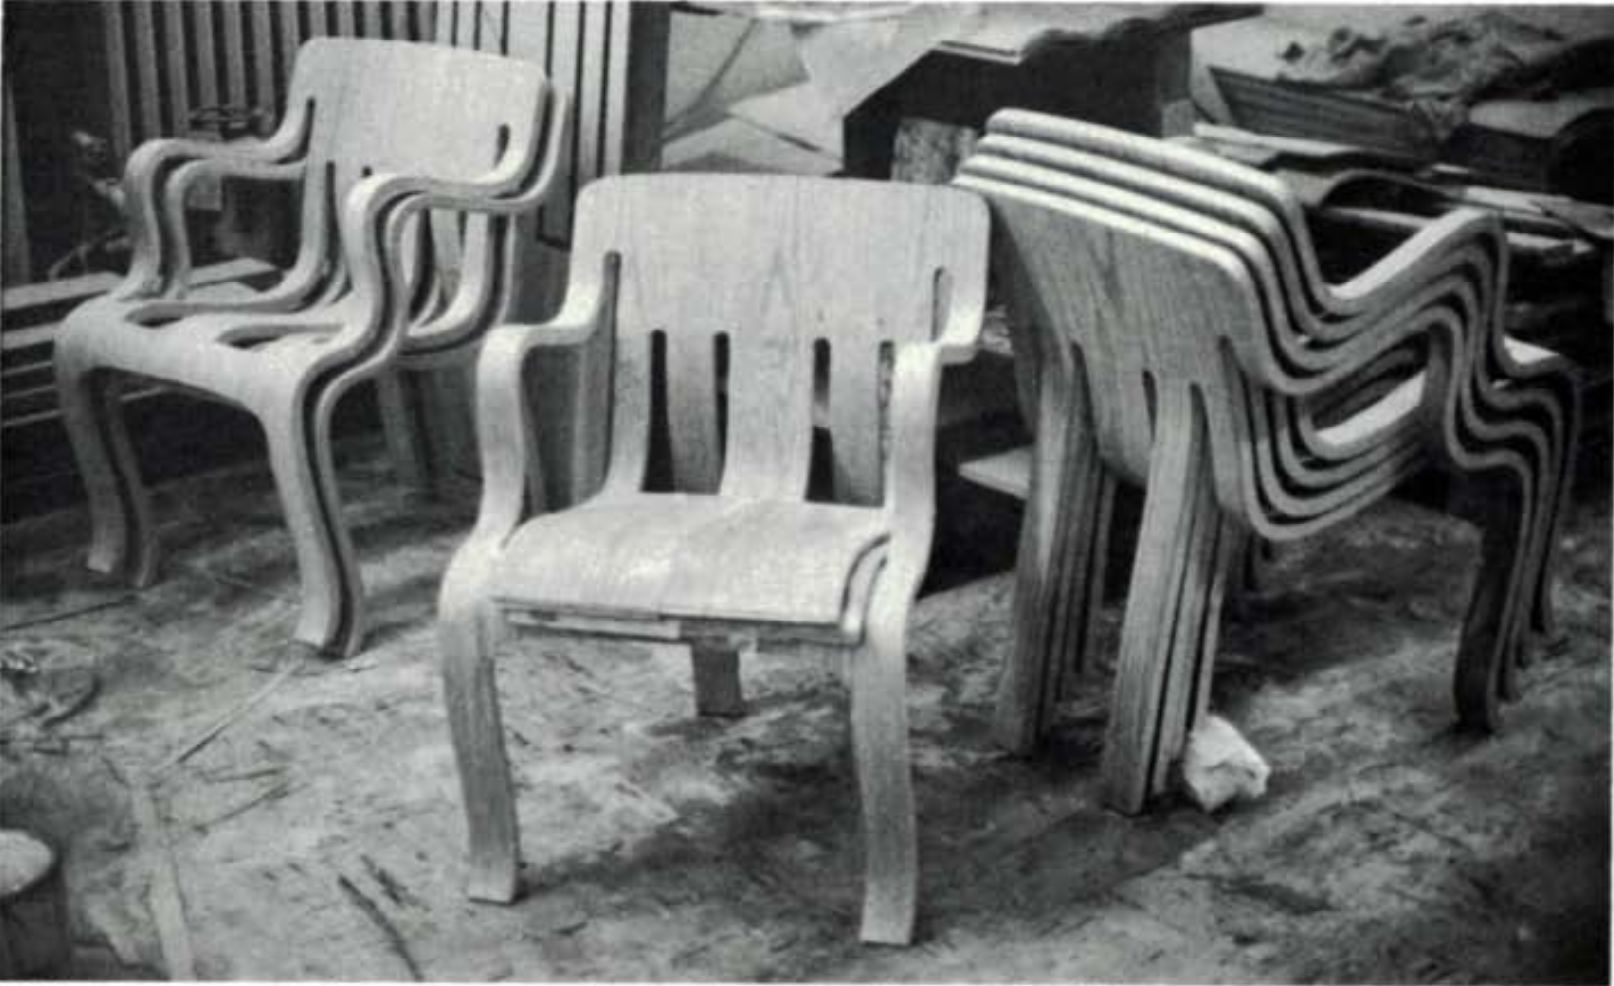 Three stacks of chairs, showing different angles of the chair.